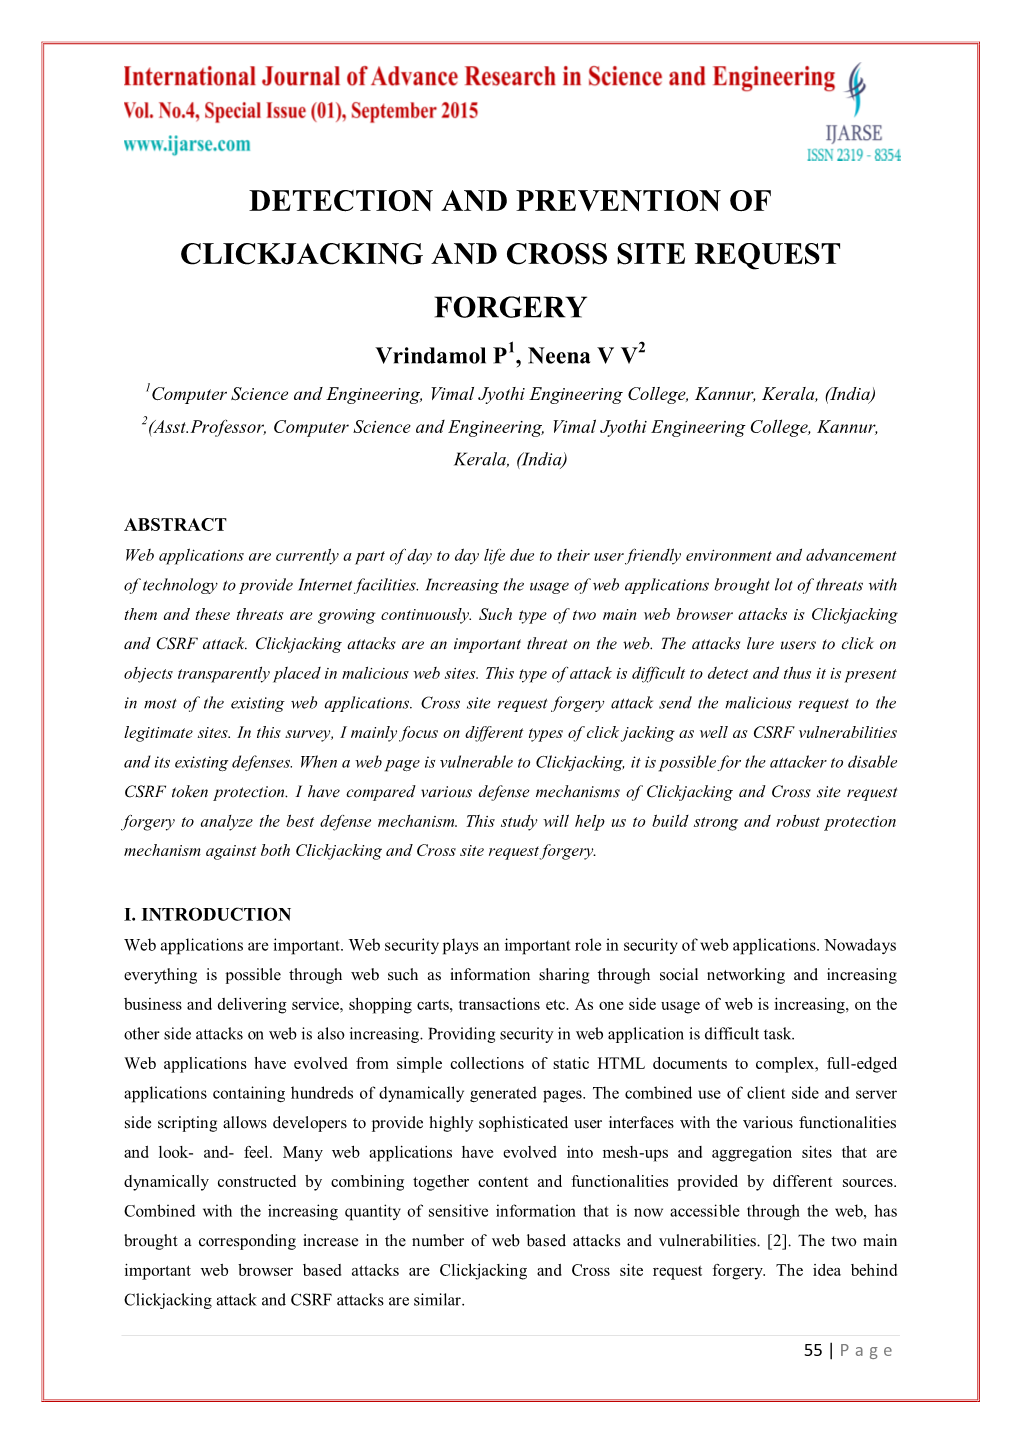 Detection and Prevention of Clickjacking and Cross Site